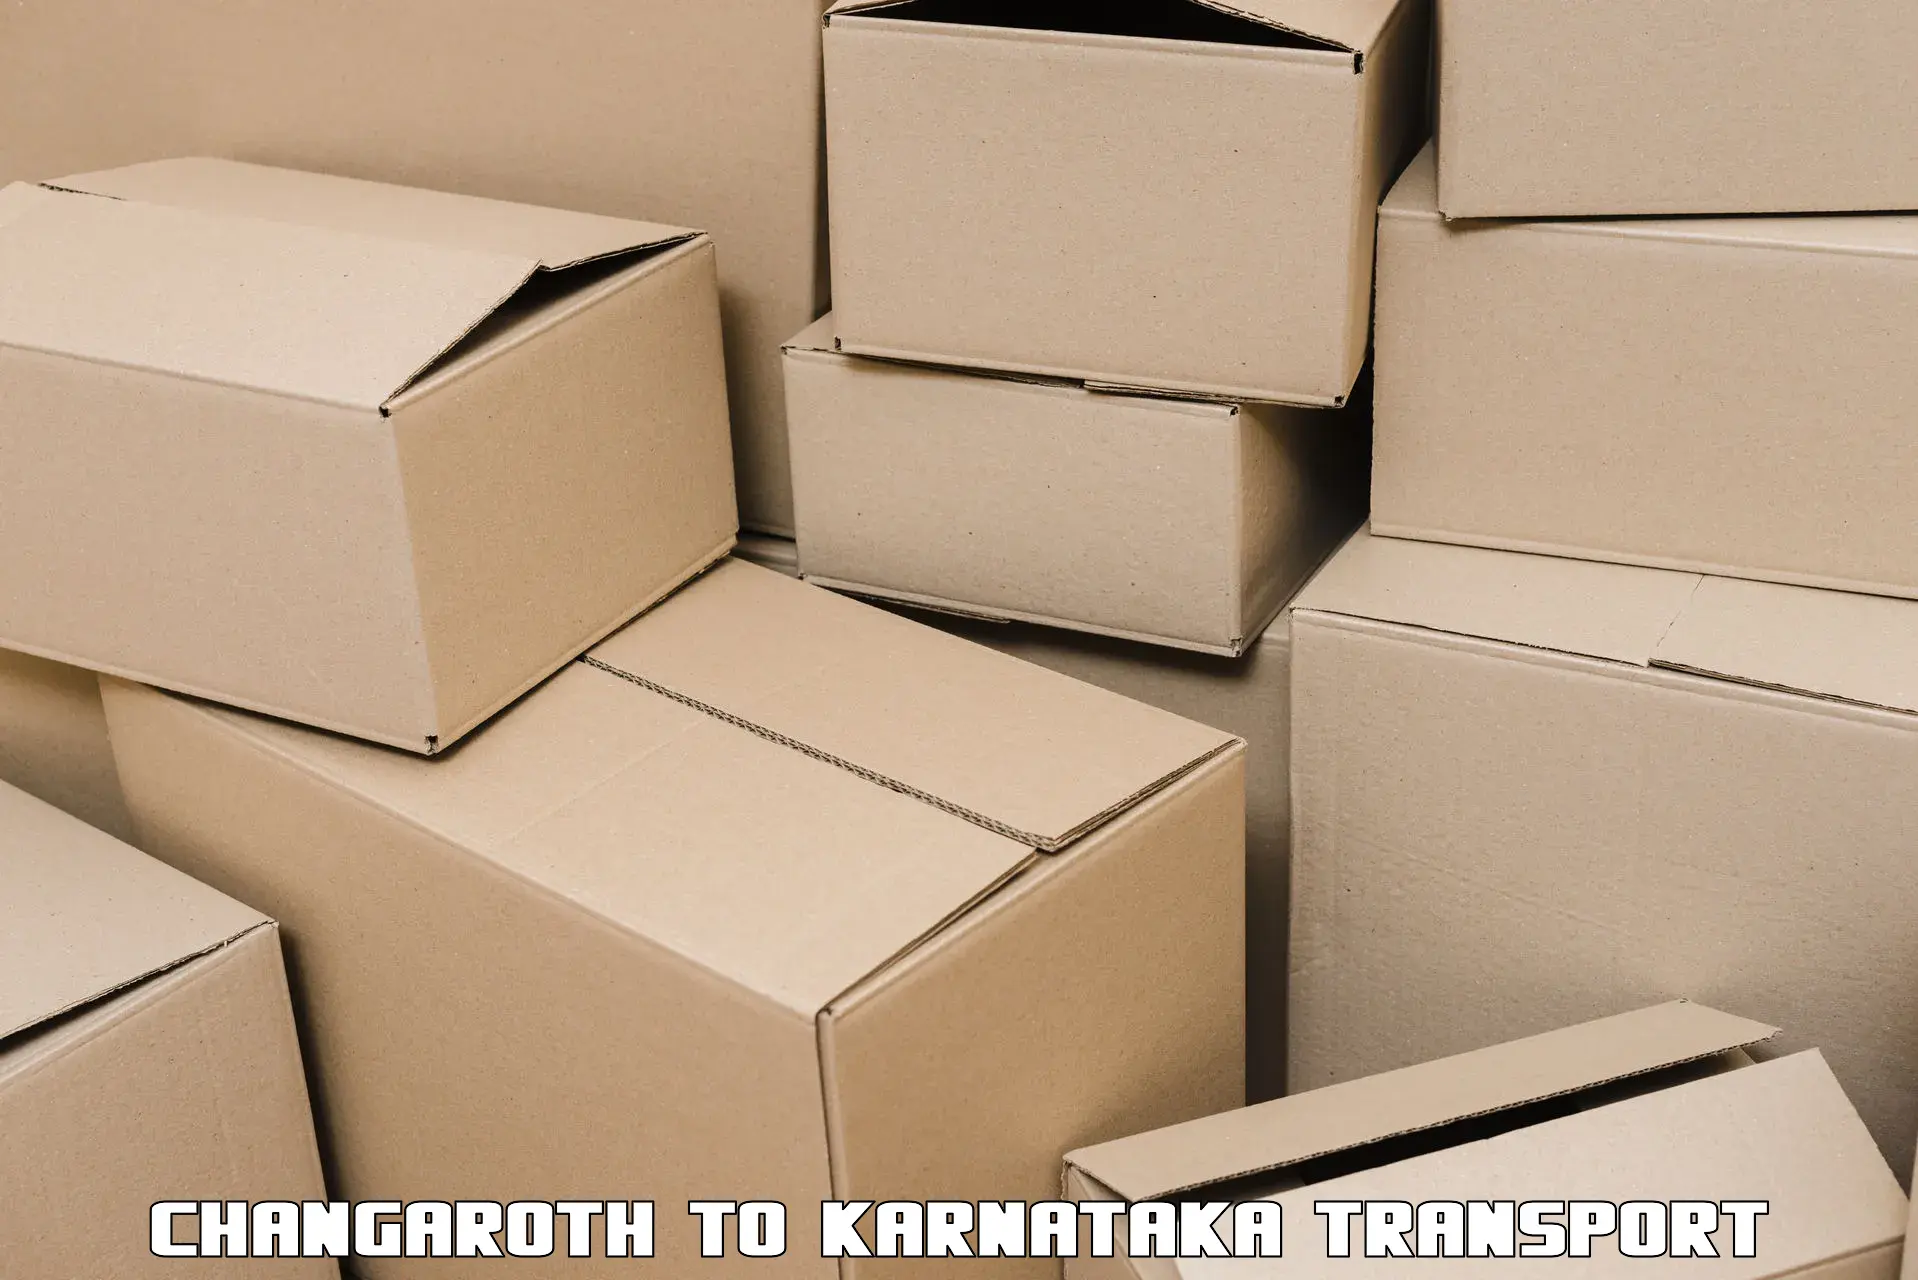 Part load transport service in India in Changaroth to Manipal Academy of Higher Education